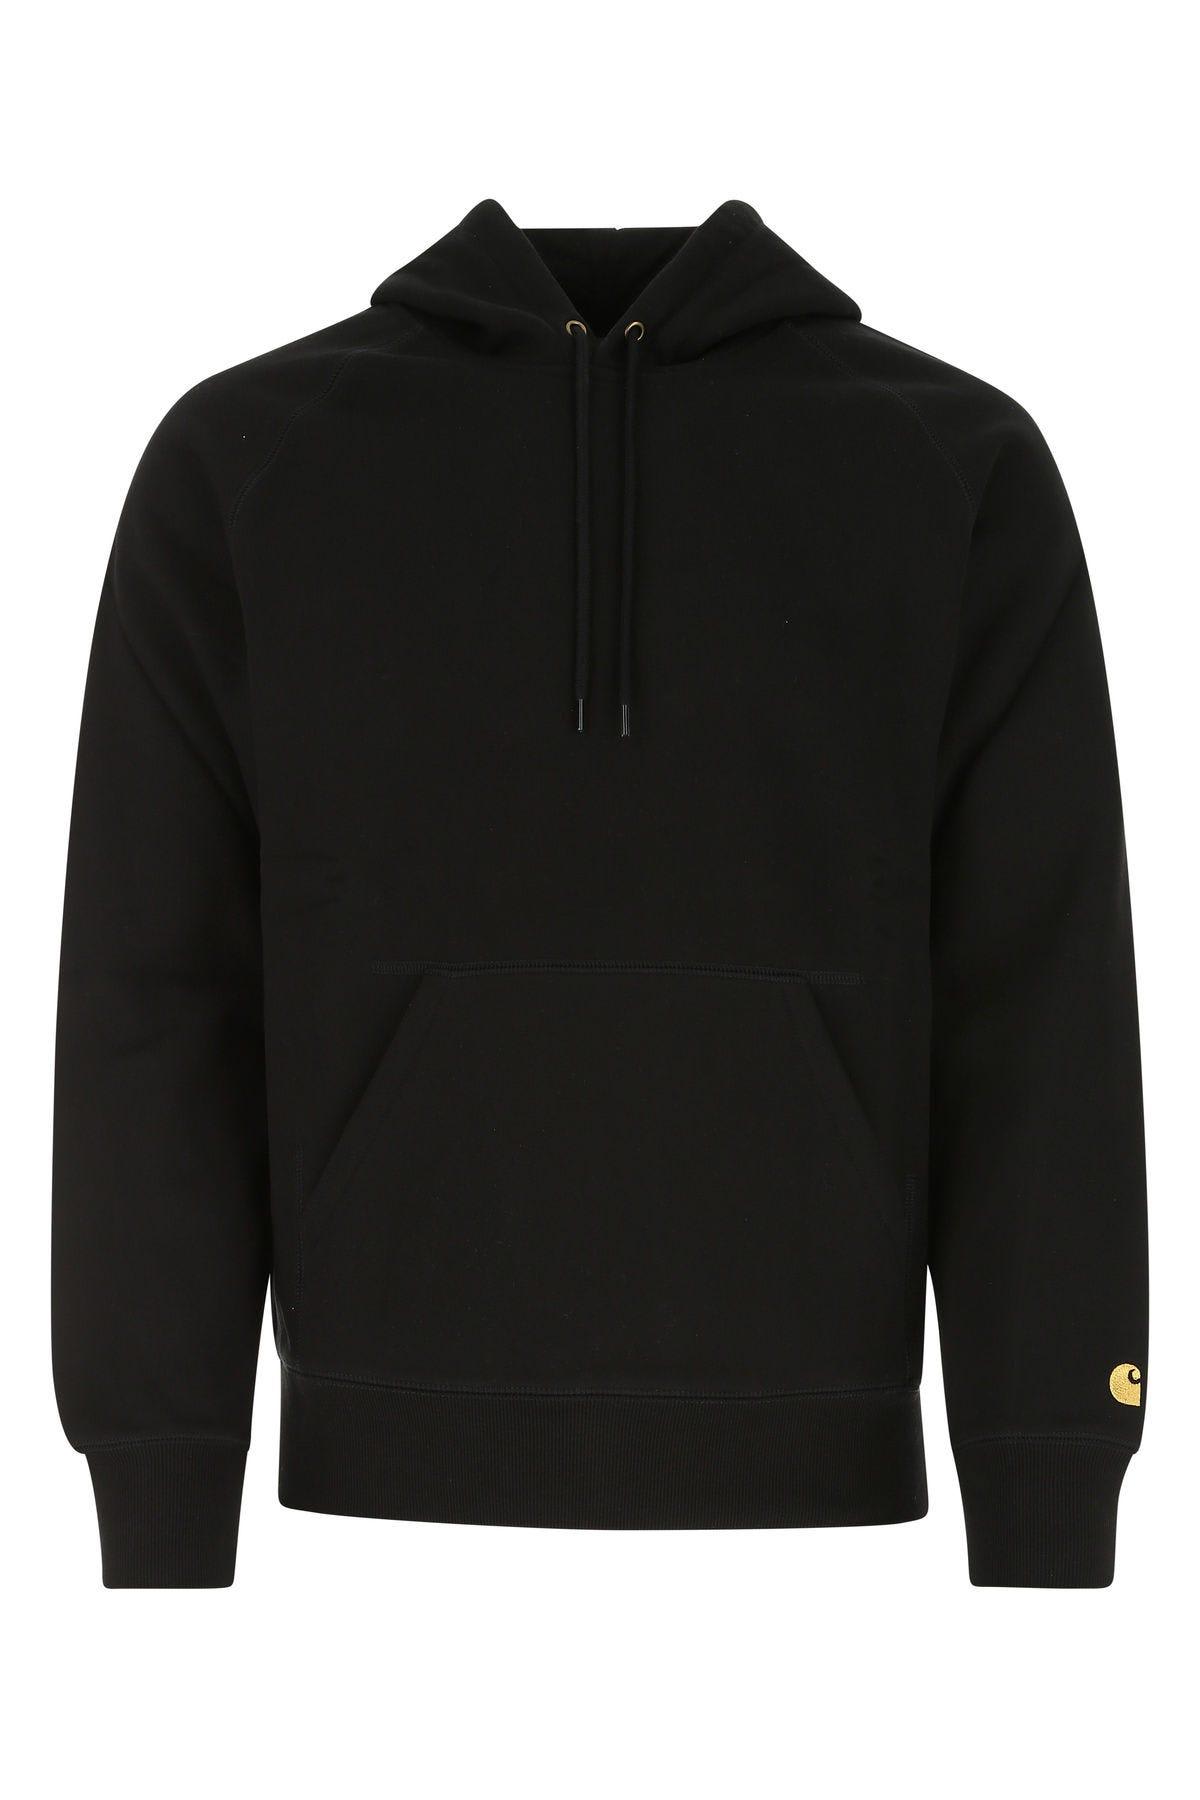 Carhartt Black Cotton Blend Hooded Chase Sweat